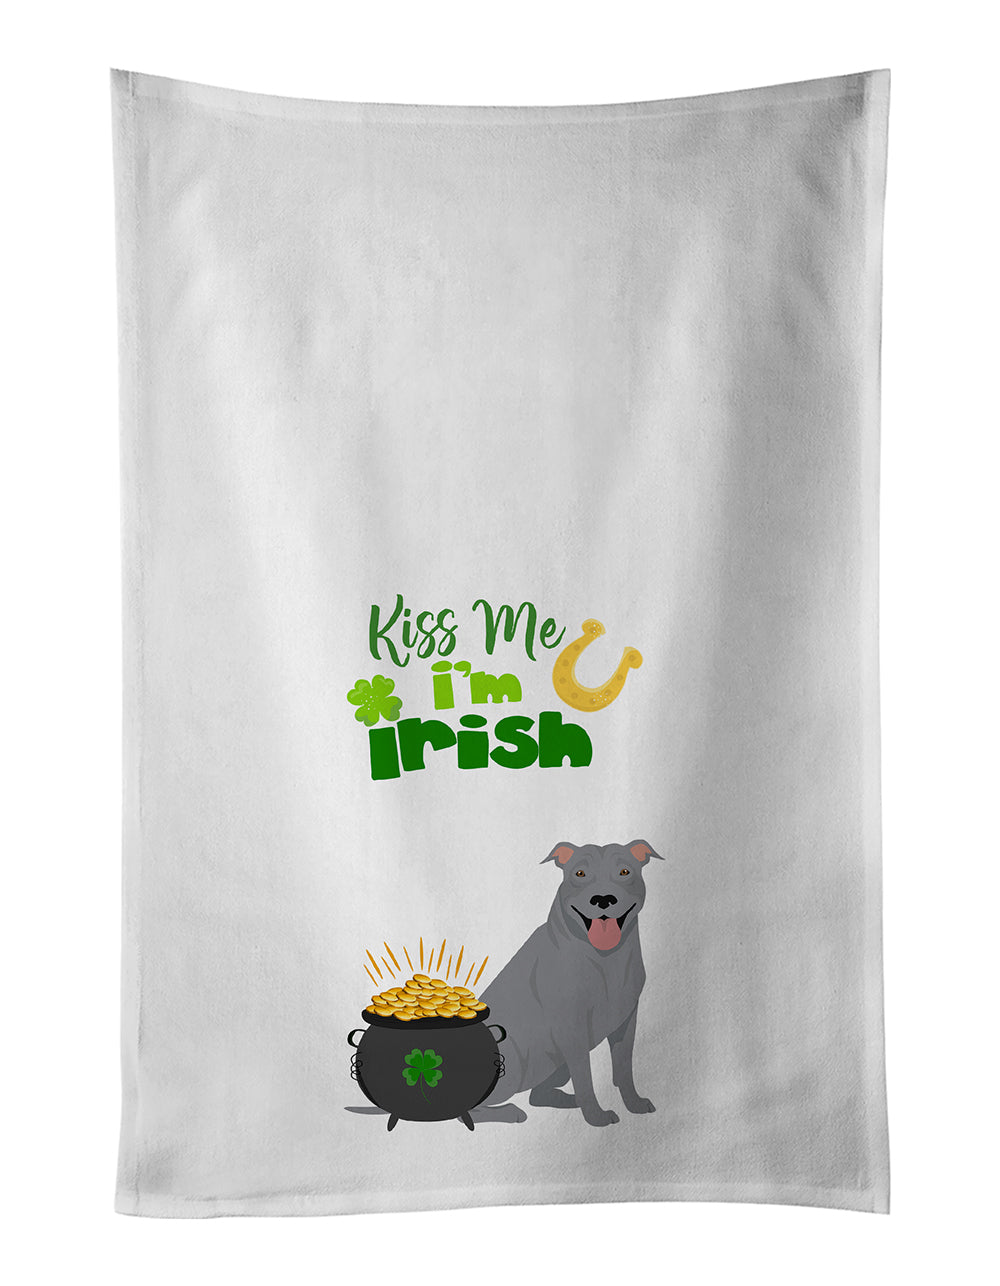 Buy this Blue Pit Bull Terrier St. Patrick's Day White Kitchen Towel Set of 2 Dish Towels